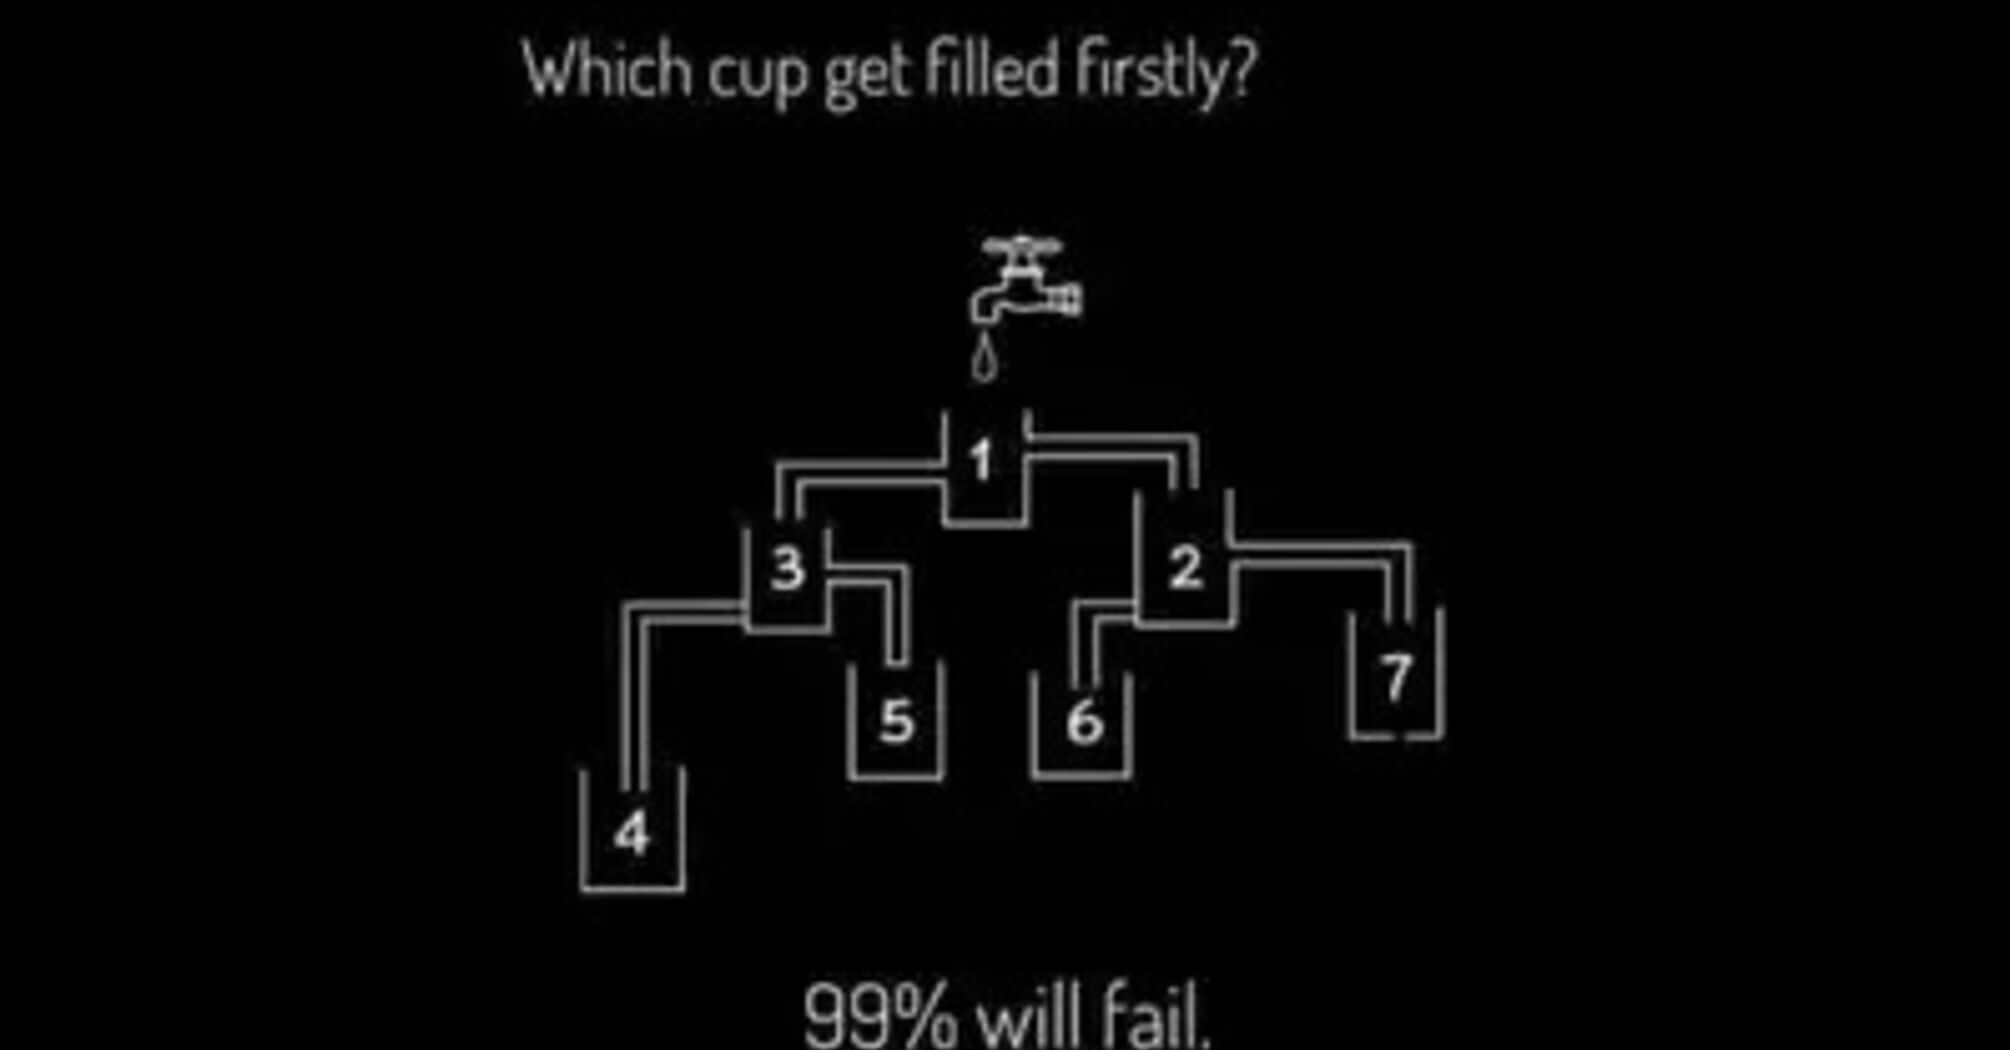 Which cup will be filled first?